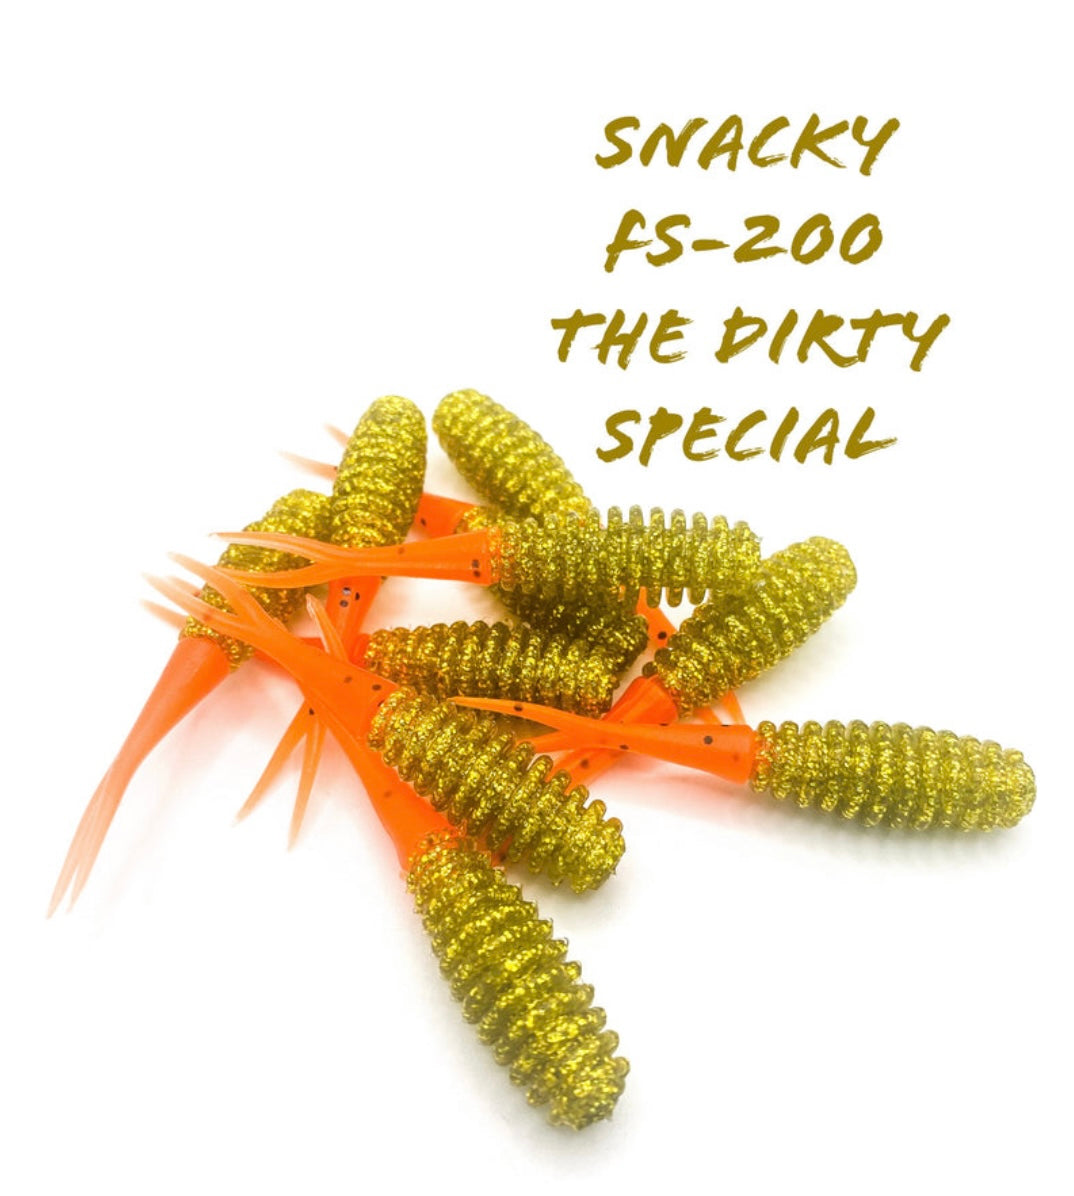 Dock fishing with Snacky lures #snackylures #fs400